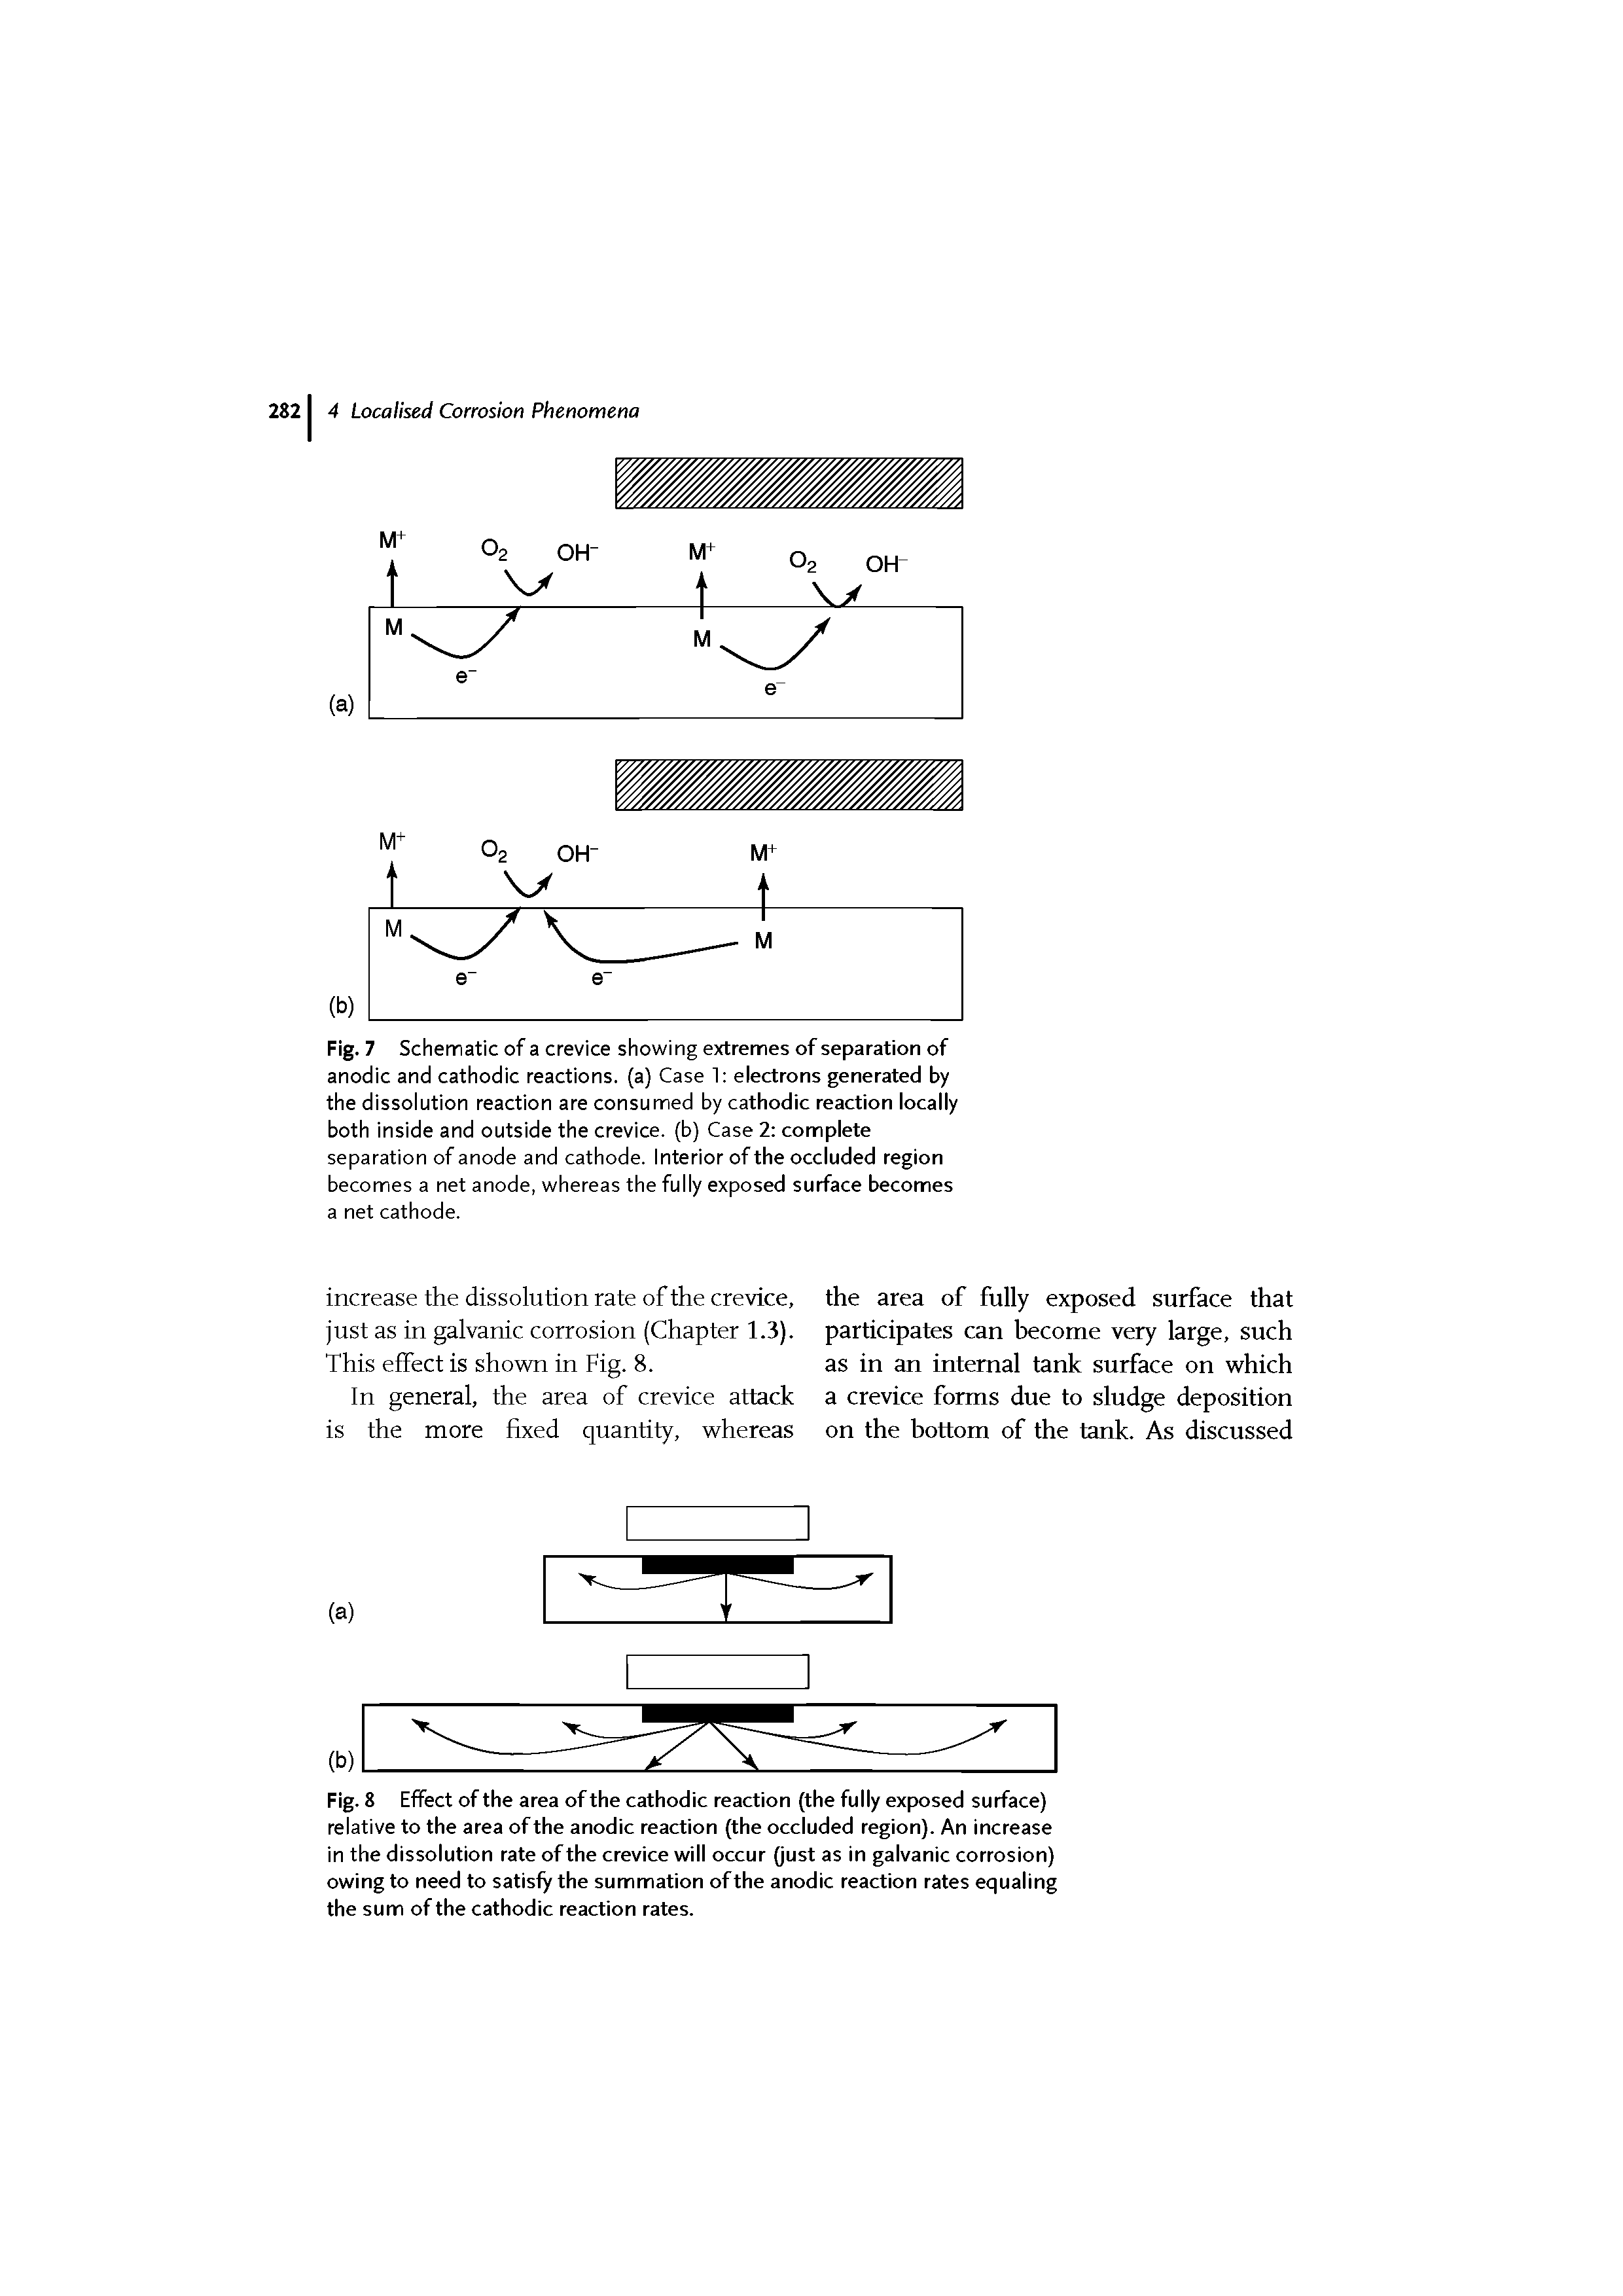 Fig. 8 Effect of the area of the cathodic reaction (the fully exposed surface) relative to the area of the anodic reaction (the occluded region). An increase in the dissolution rate of the crevice will occur (just as in galvanic corrosion) owing to need to satisfy the summation of the anodic reaction rates equaling the sum of the cathodic reaction rates.